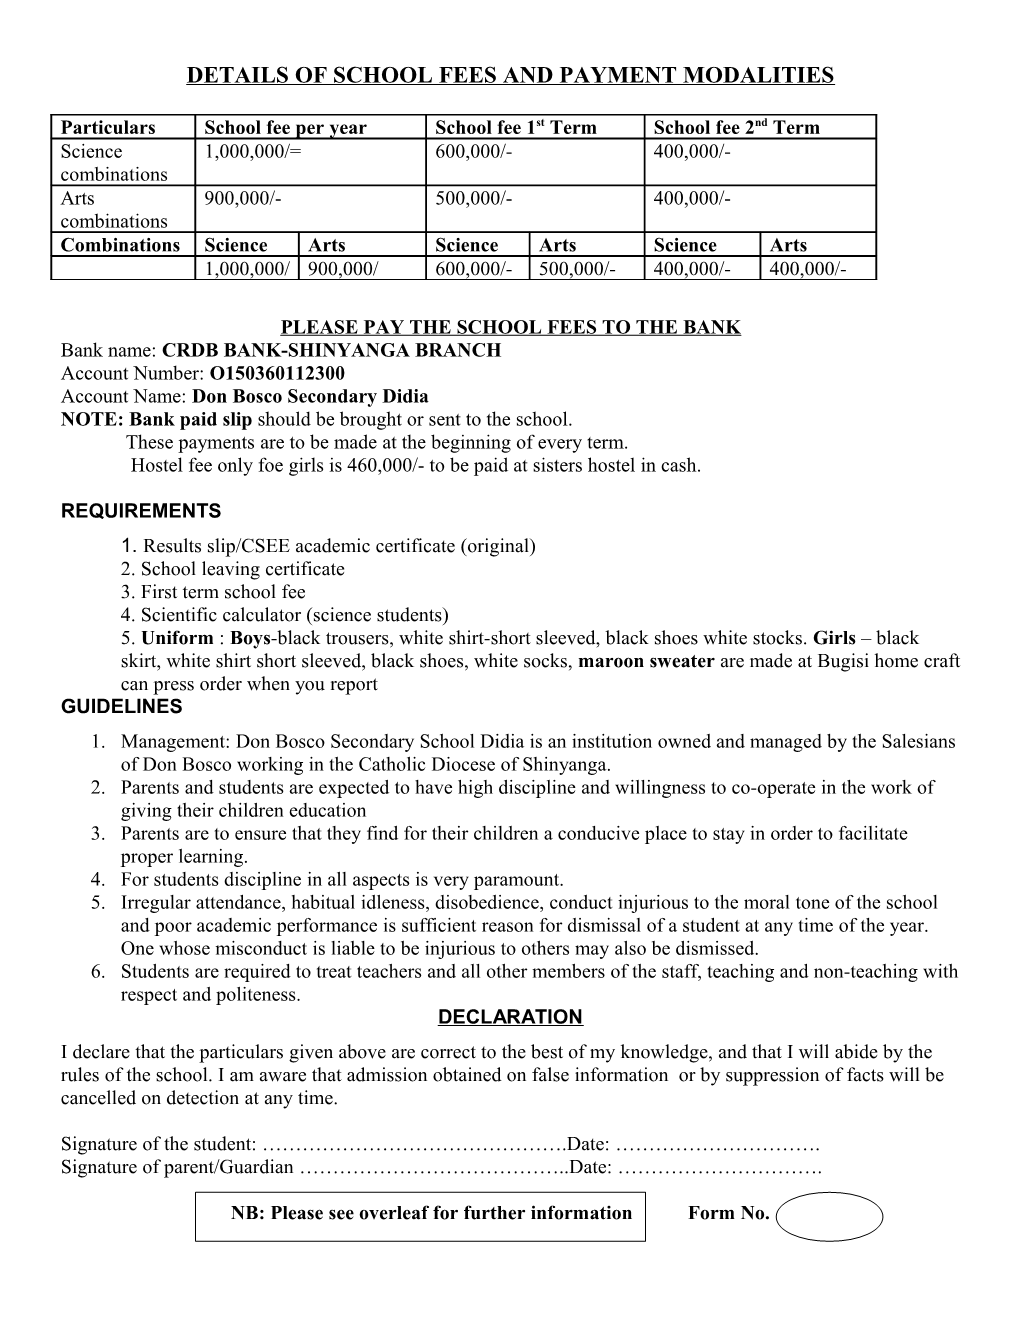 Application Form for a Level Studies